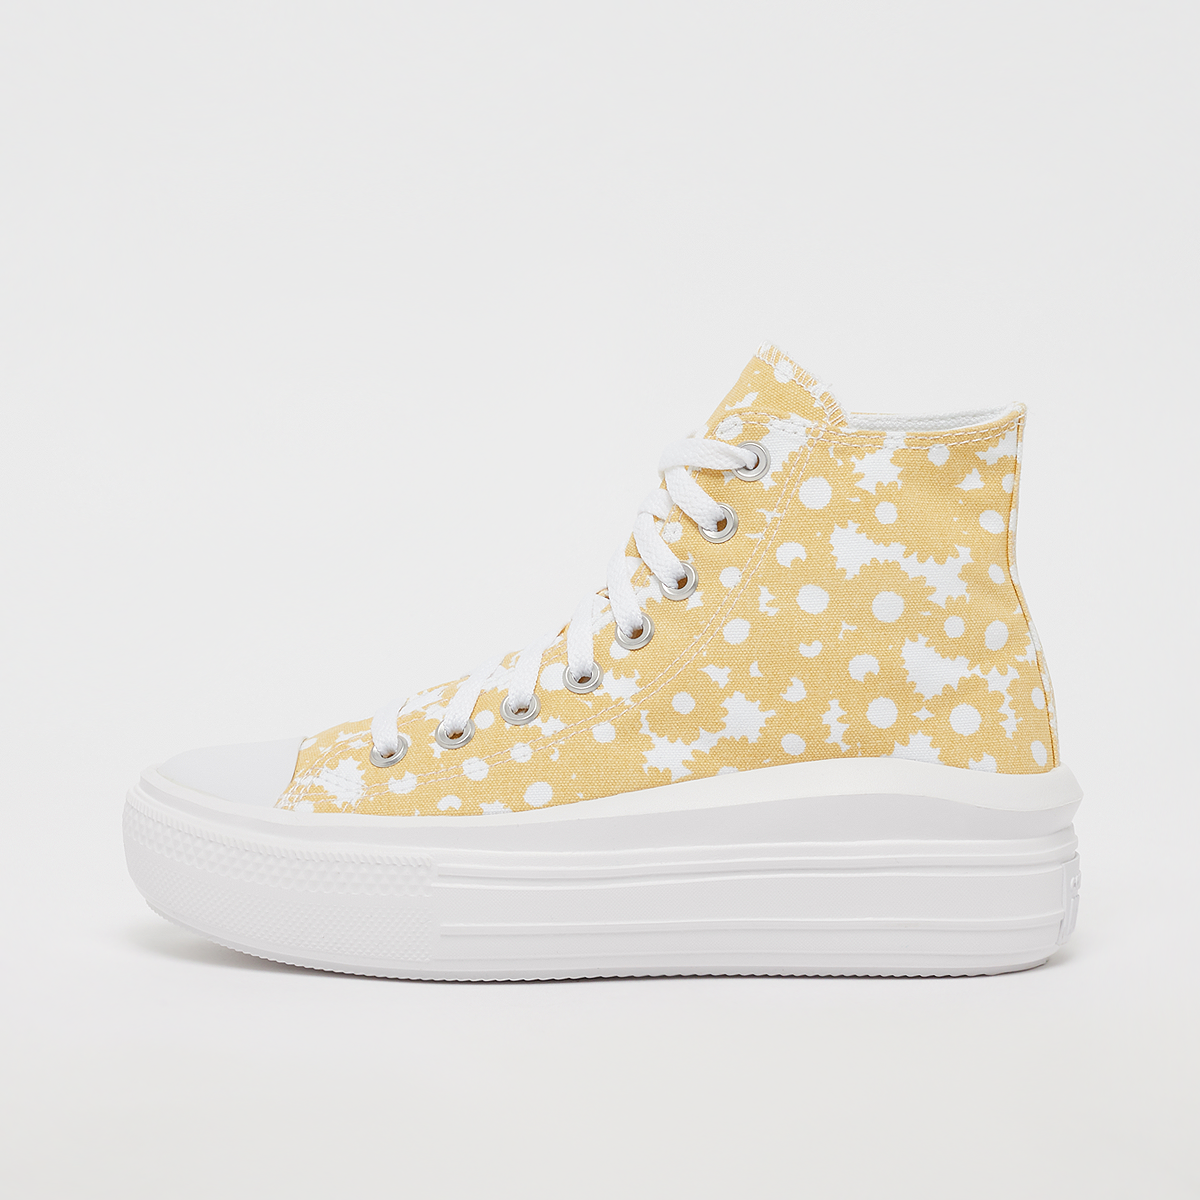 Productafbeelding: Chuck Taylor All Star Move Floral Platform